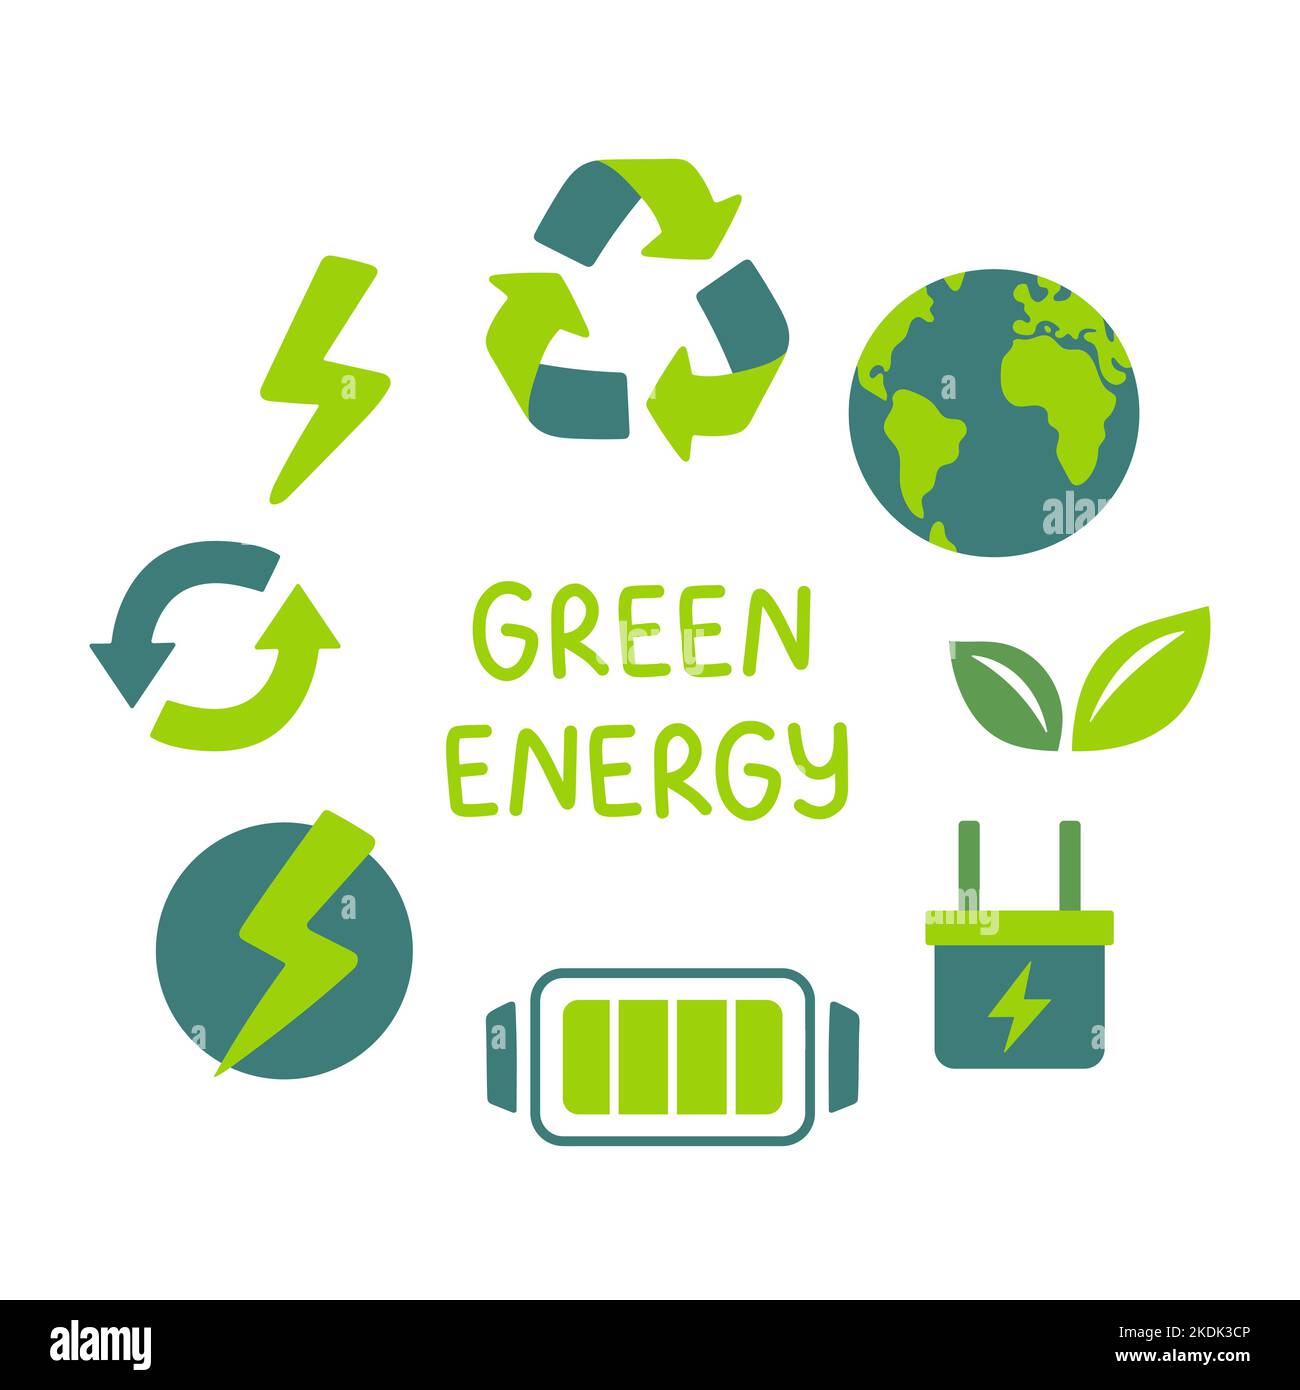 Green energy concept icons. Ecology and Environment related color icon set. Renewable Energy vector sign collection. Stock Vector